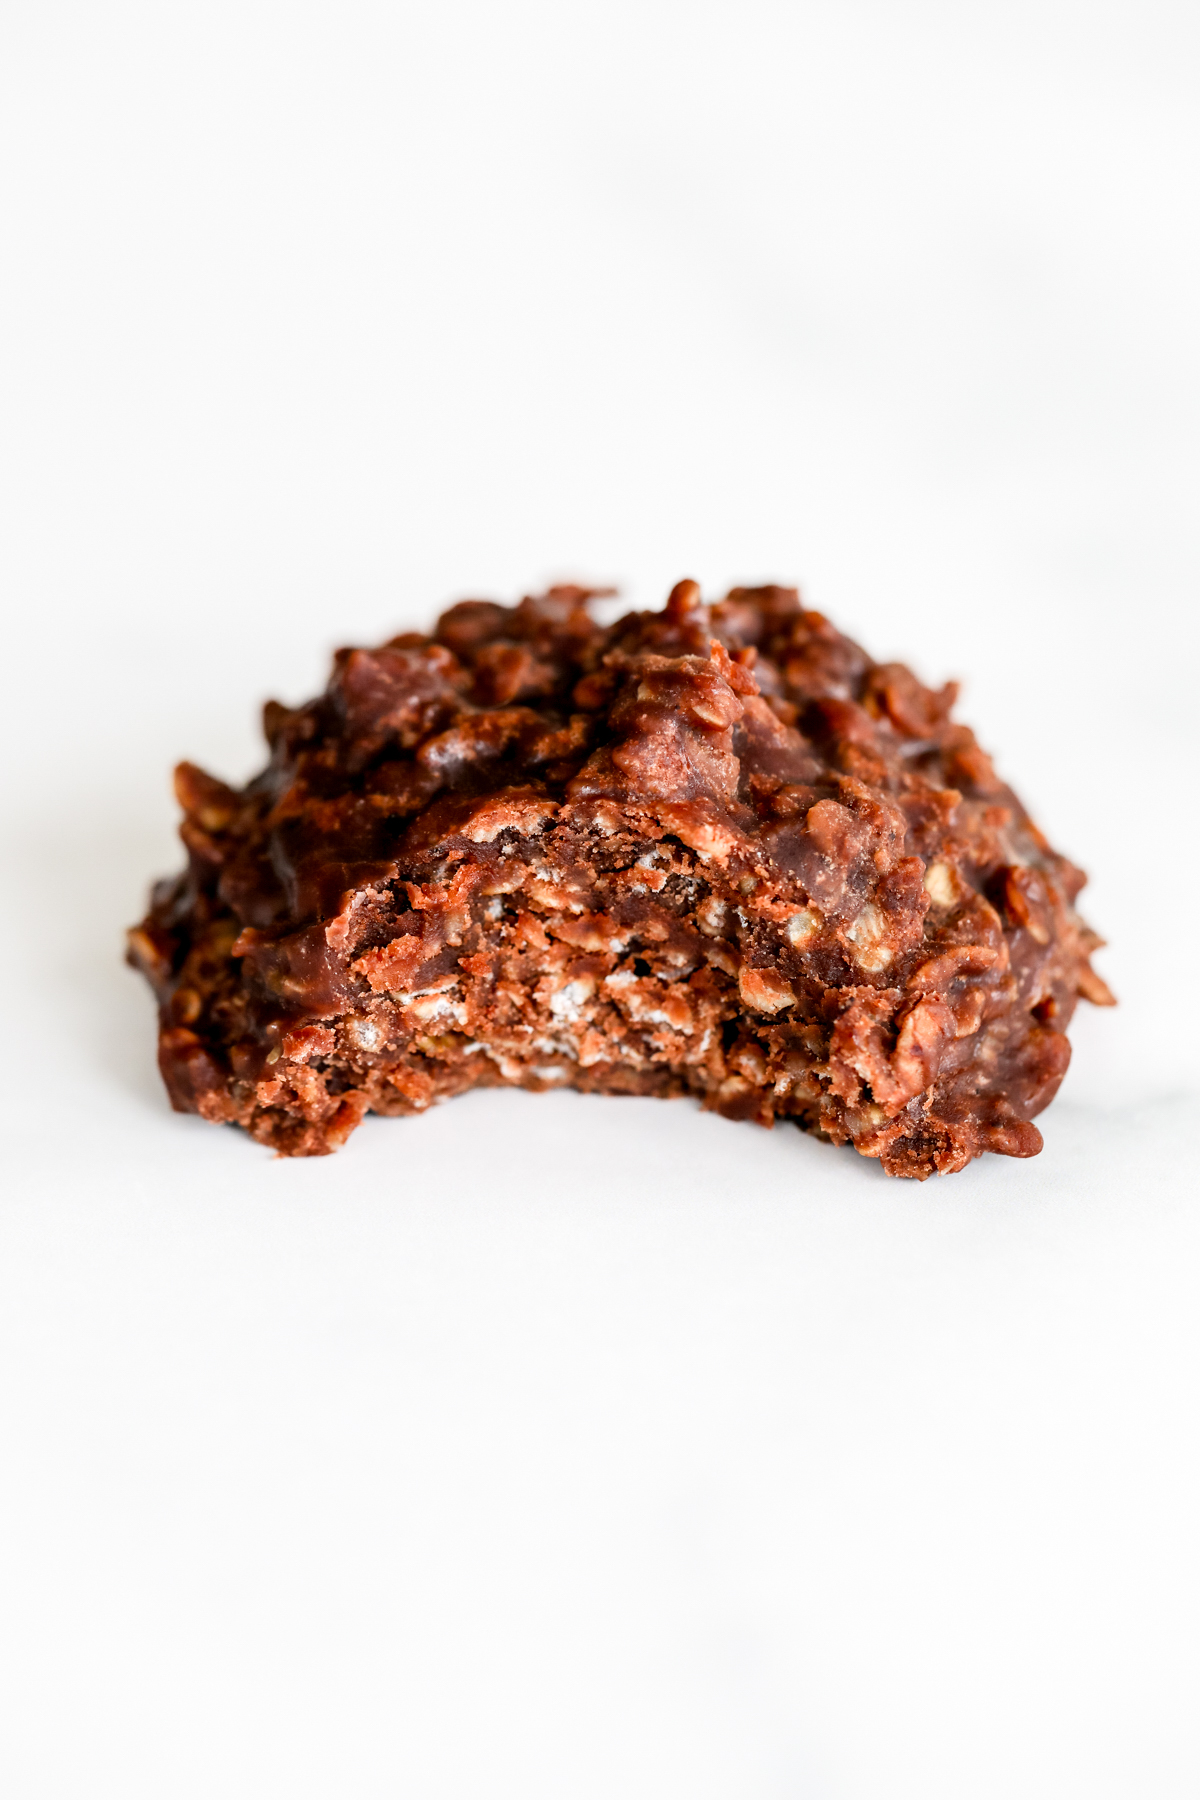 A piece of chocolate cookie, known as a preacher cookie or chocolate no bake cookie, is sitting on a clean white surface.